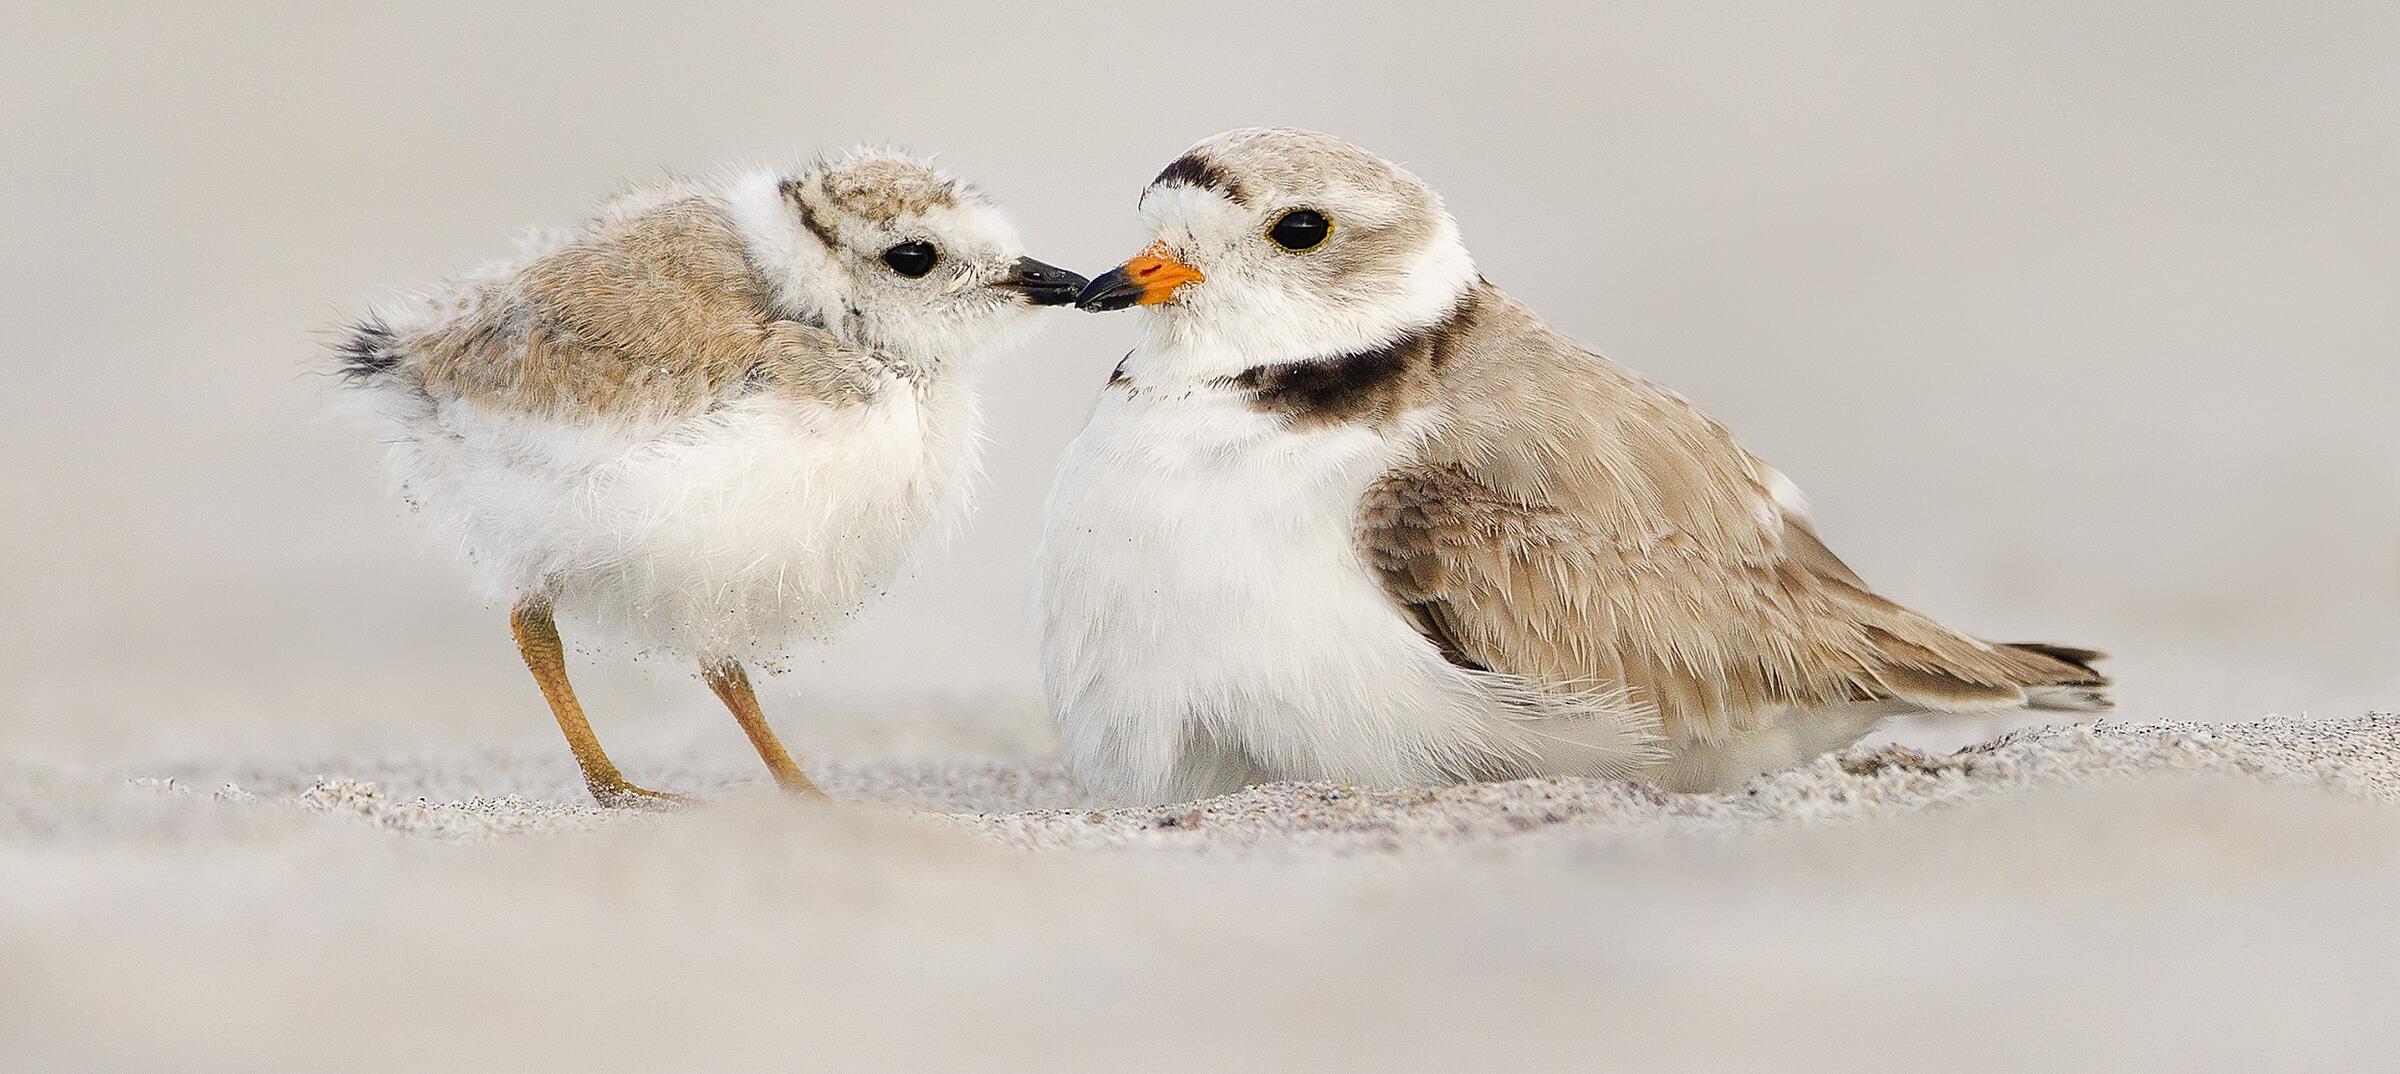 Piping Plover.